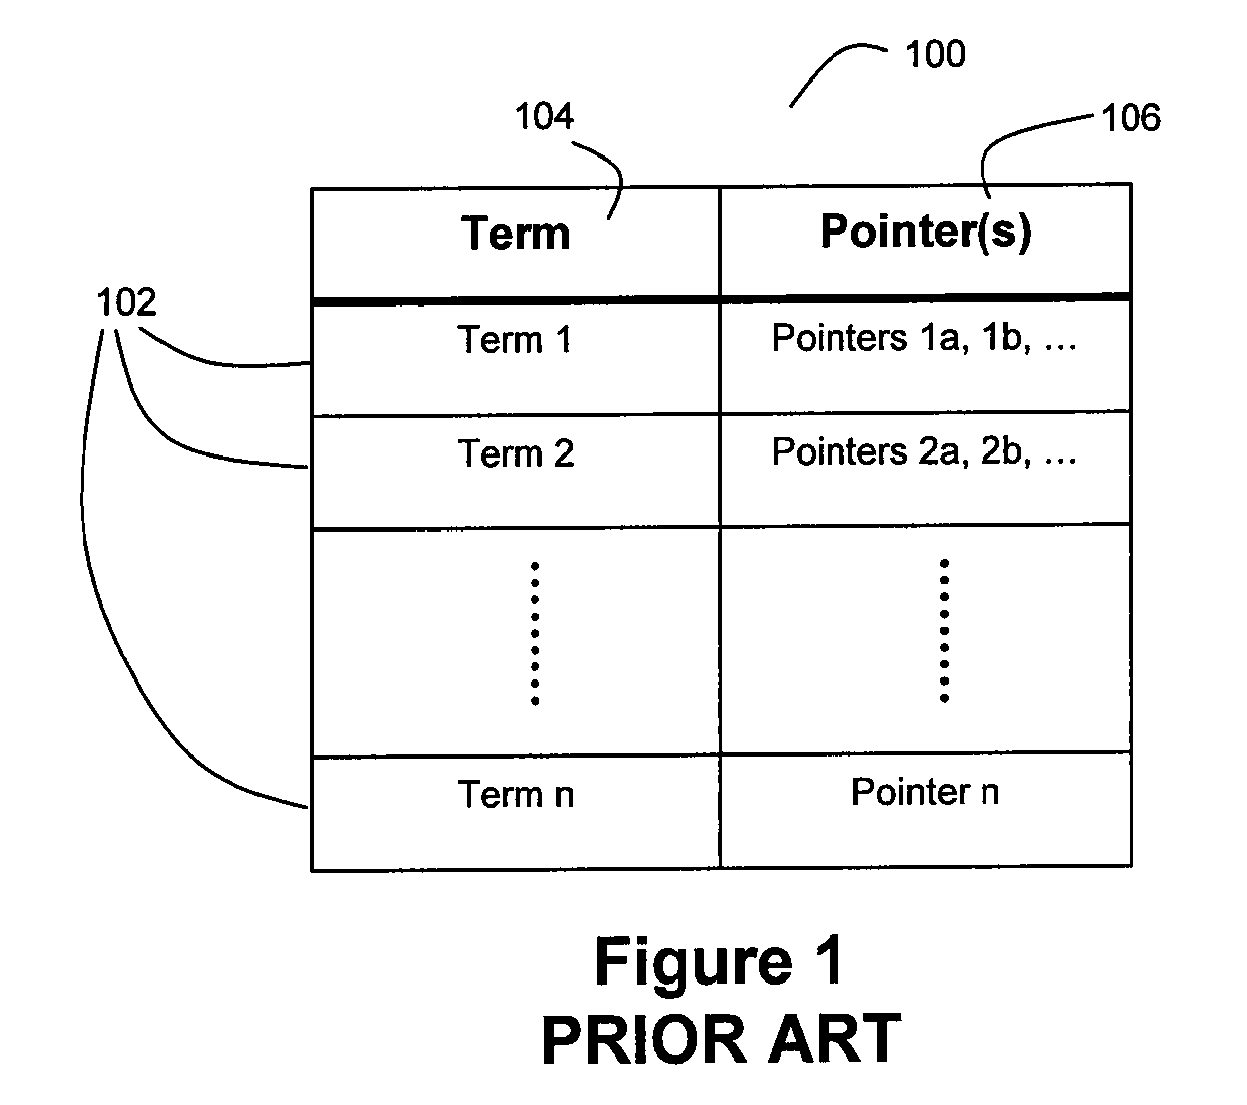 Method and System for High Performance Data Metatagging and Data Indexing Using Coprocessors